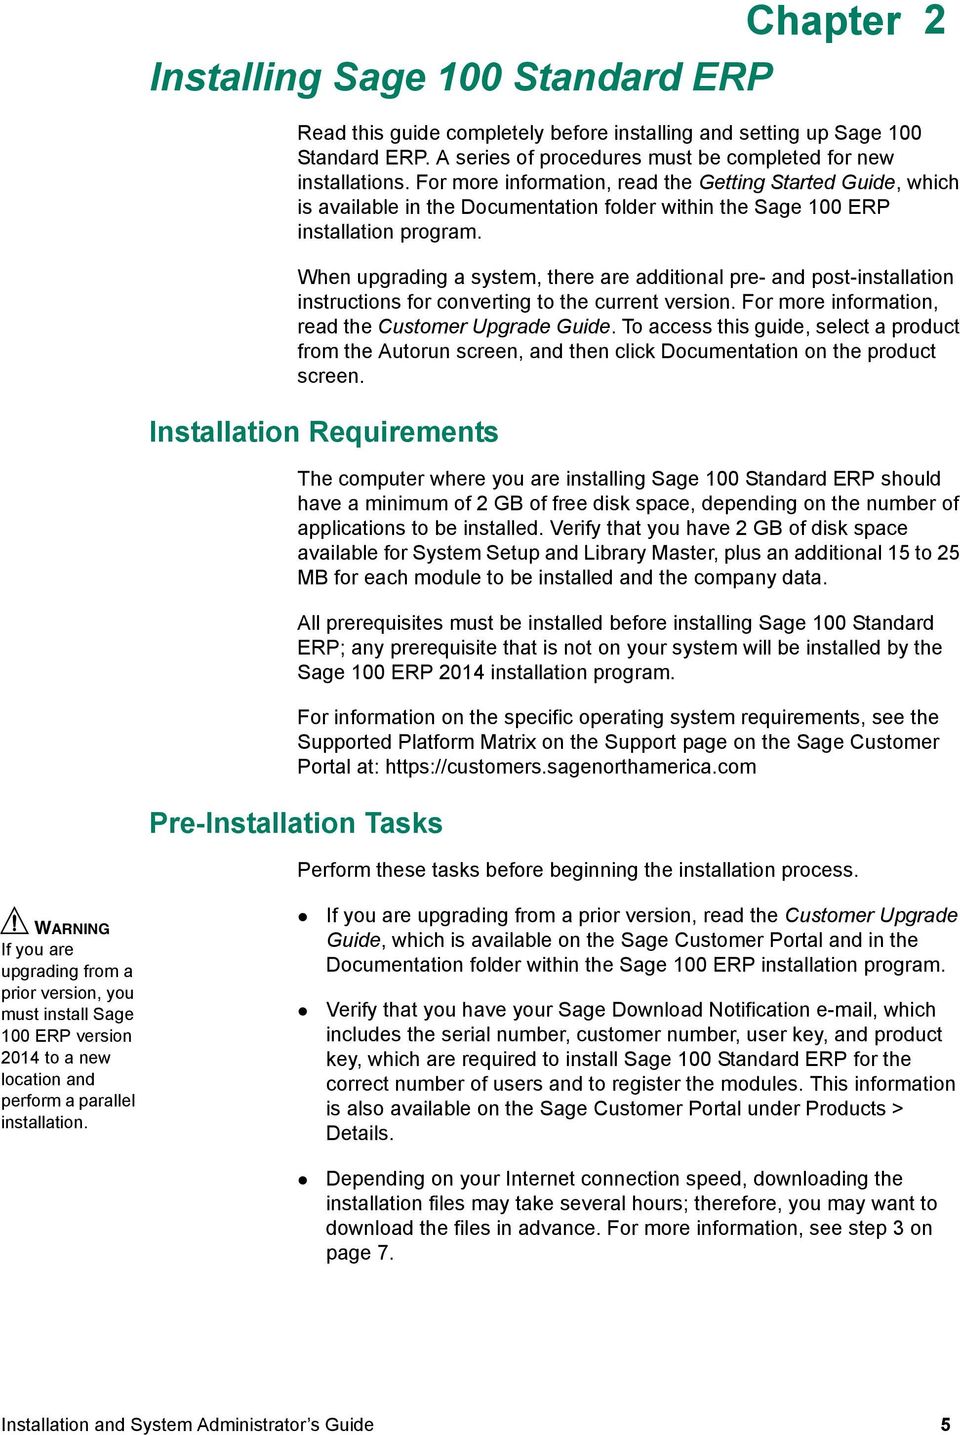 When upgrading a system, there are additional pre- and post-installation instructions for converting to the current version. For more information, read the Customer Upgrade Guide.